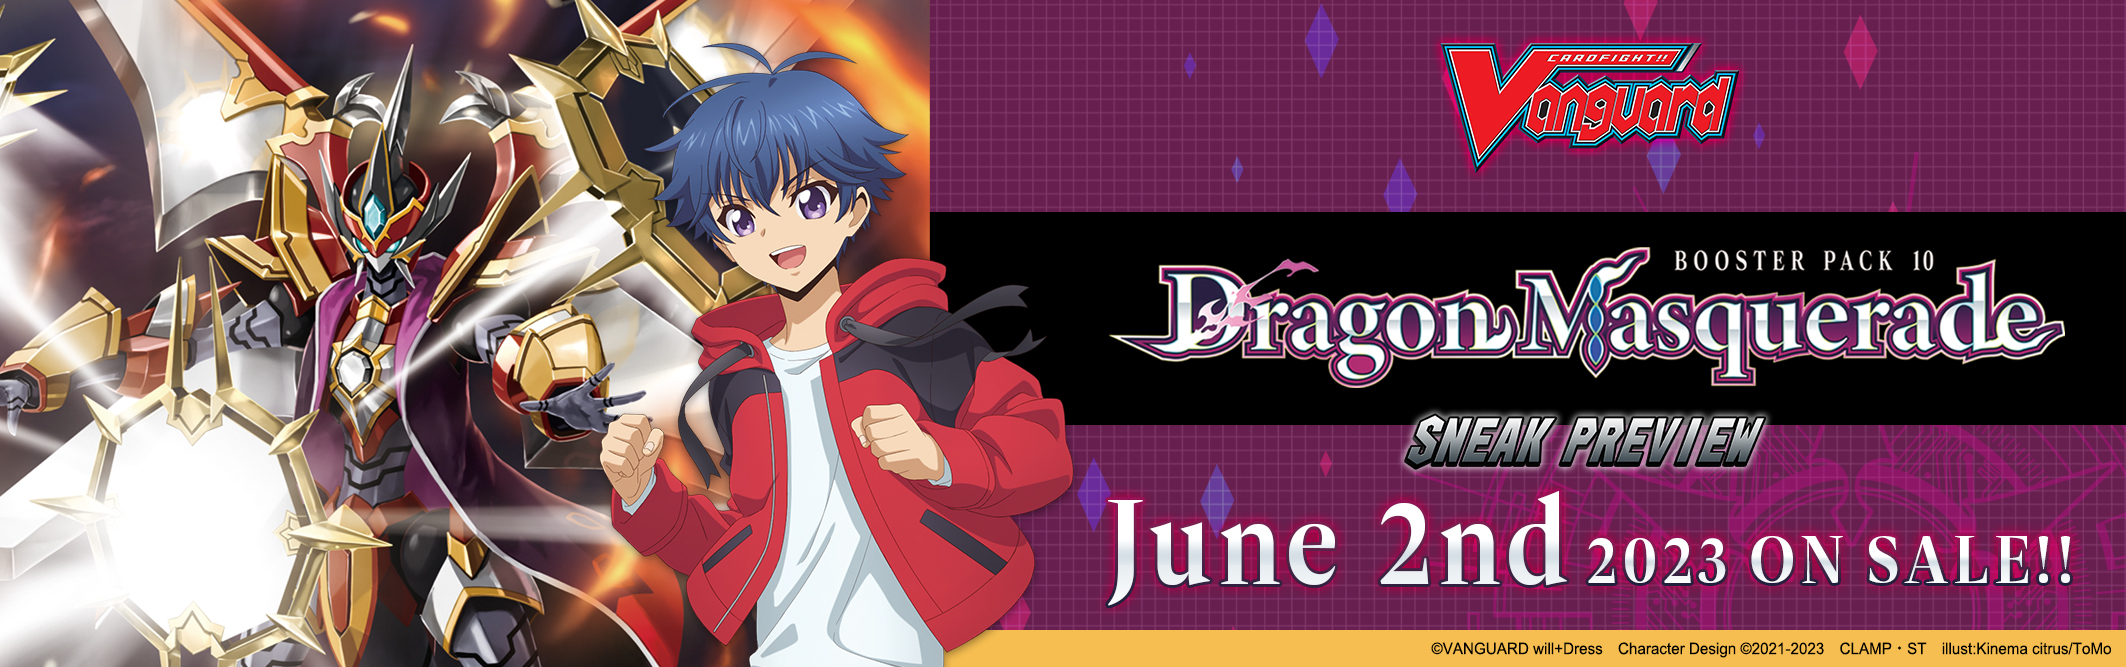 Cardfight!! Vanguard Booster Pack 10: Dragon Masquerade Sneak Preview